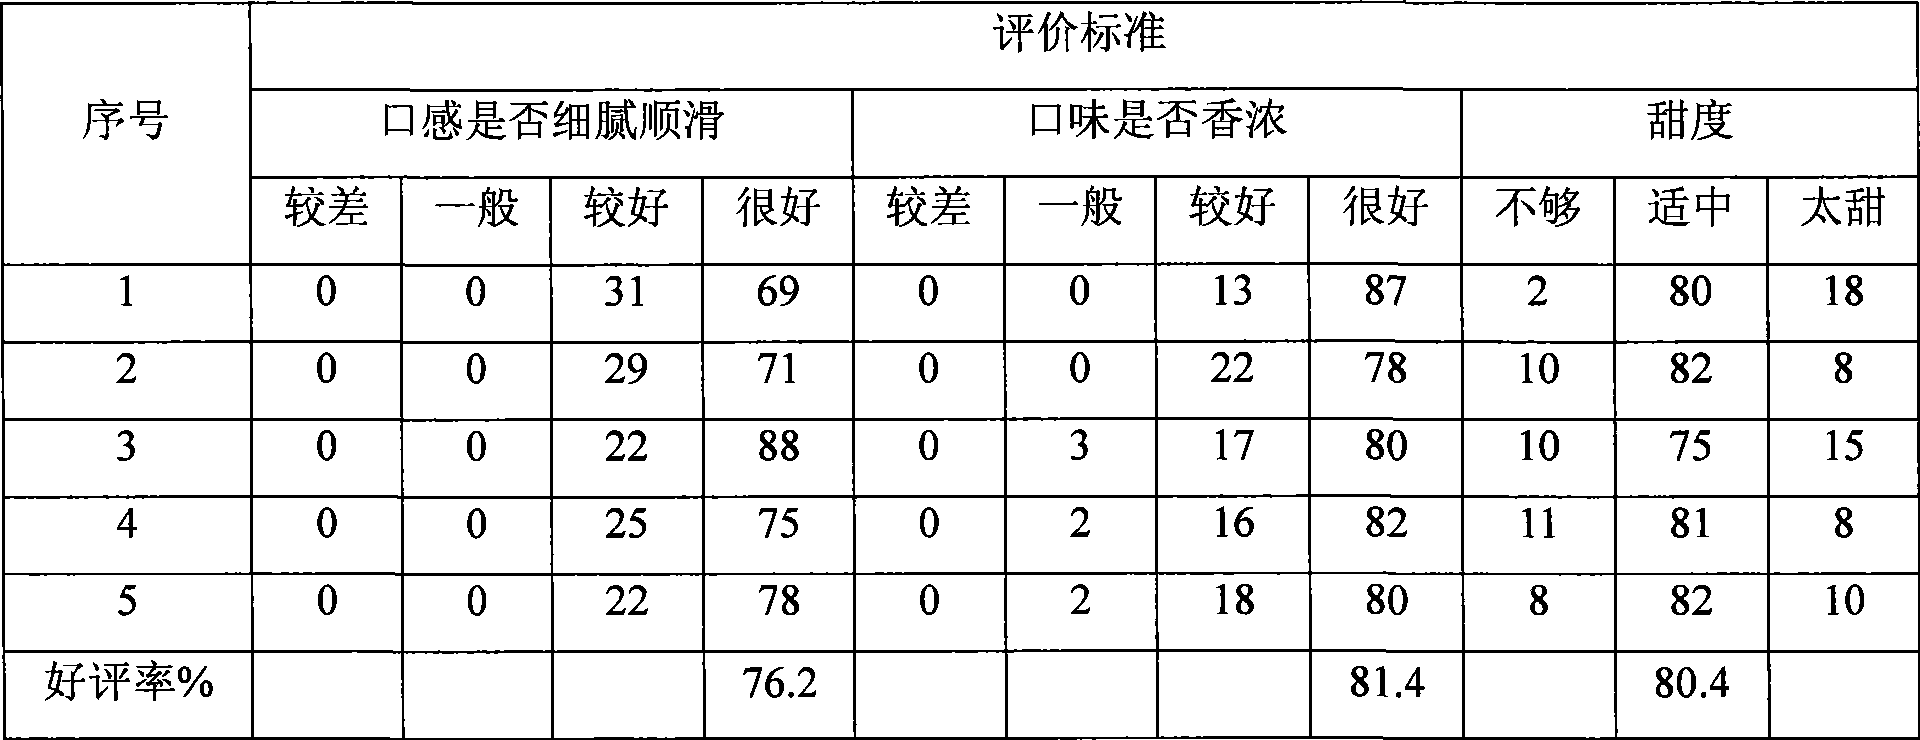 Apricot kernel drink added with seeds of plants and processing method